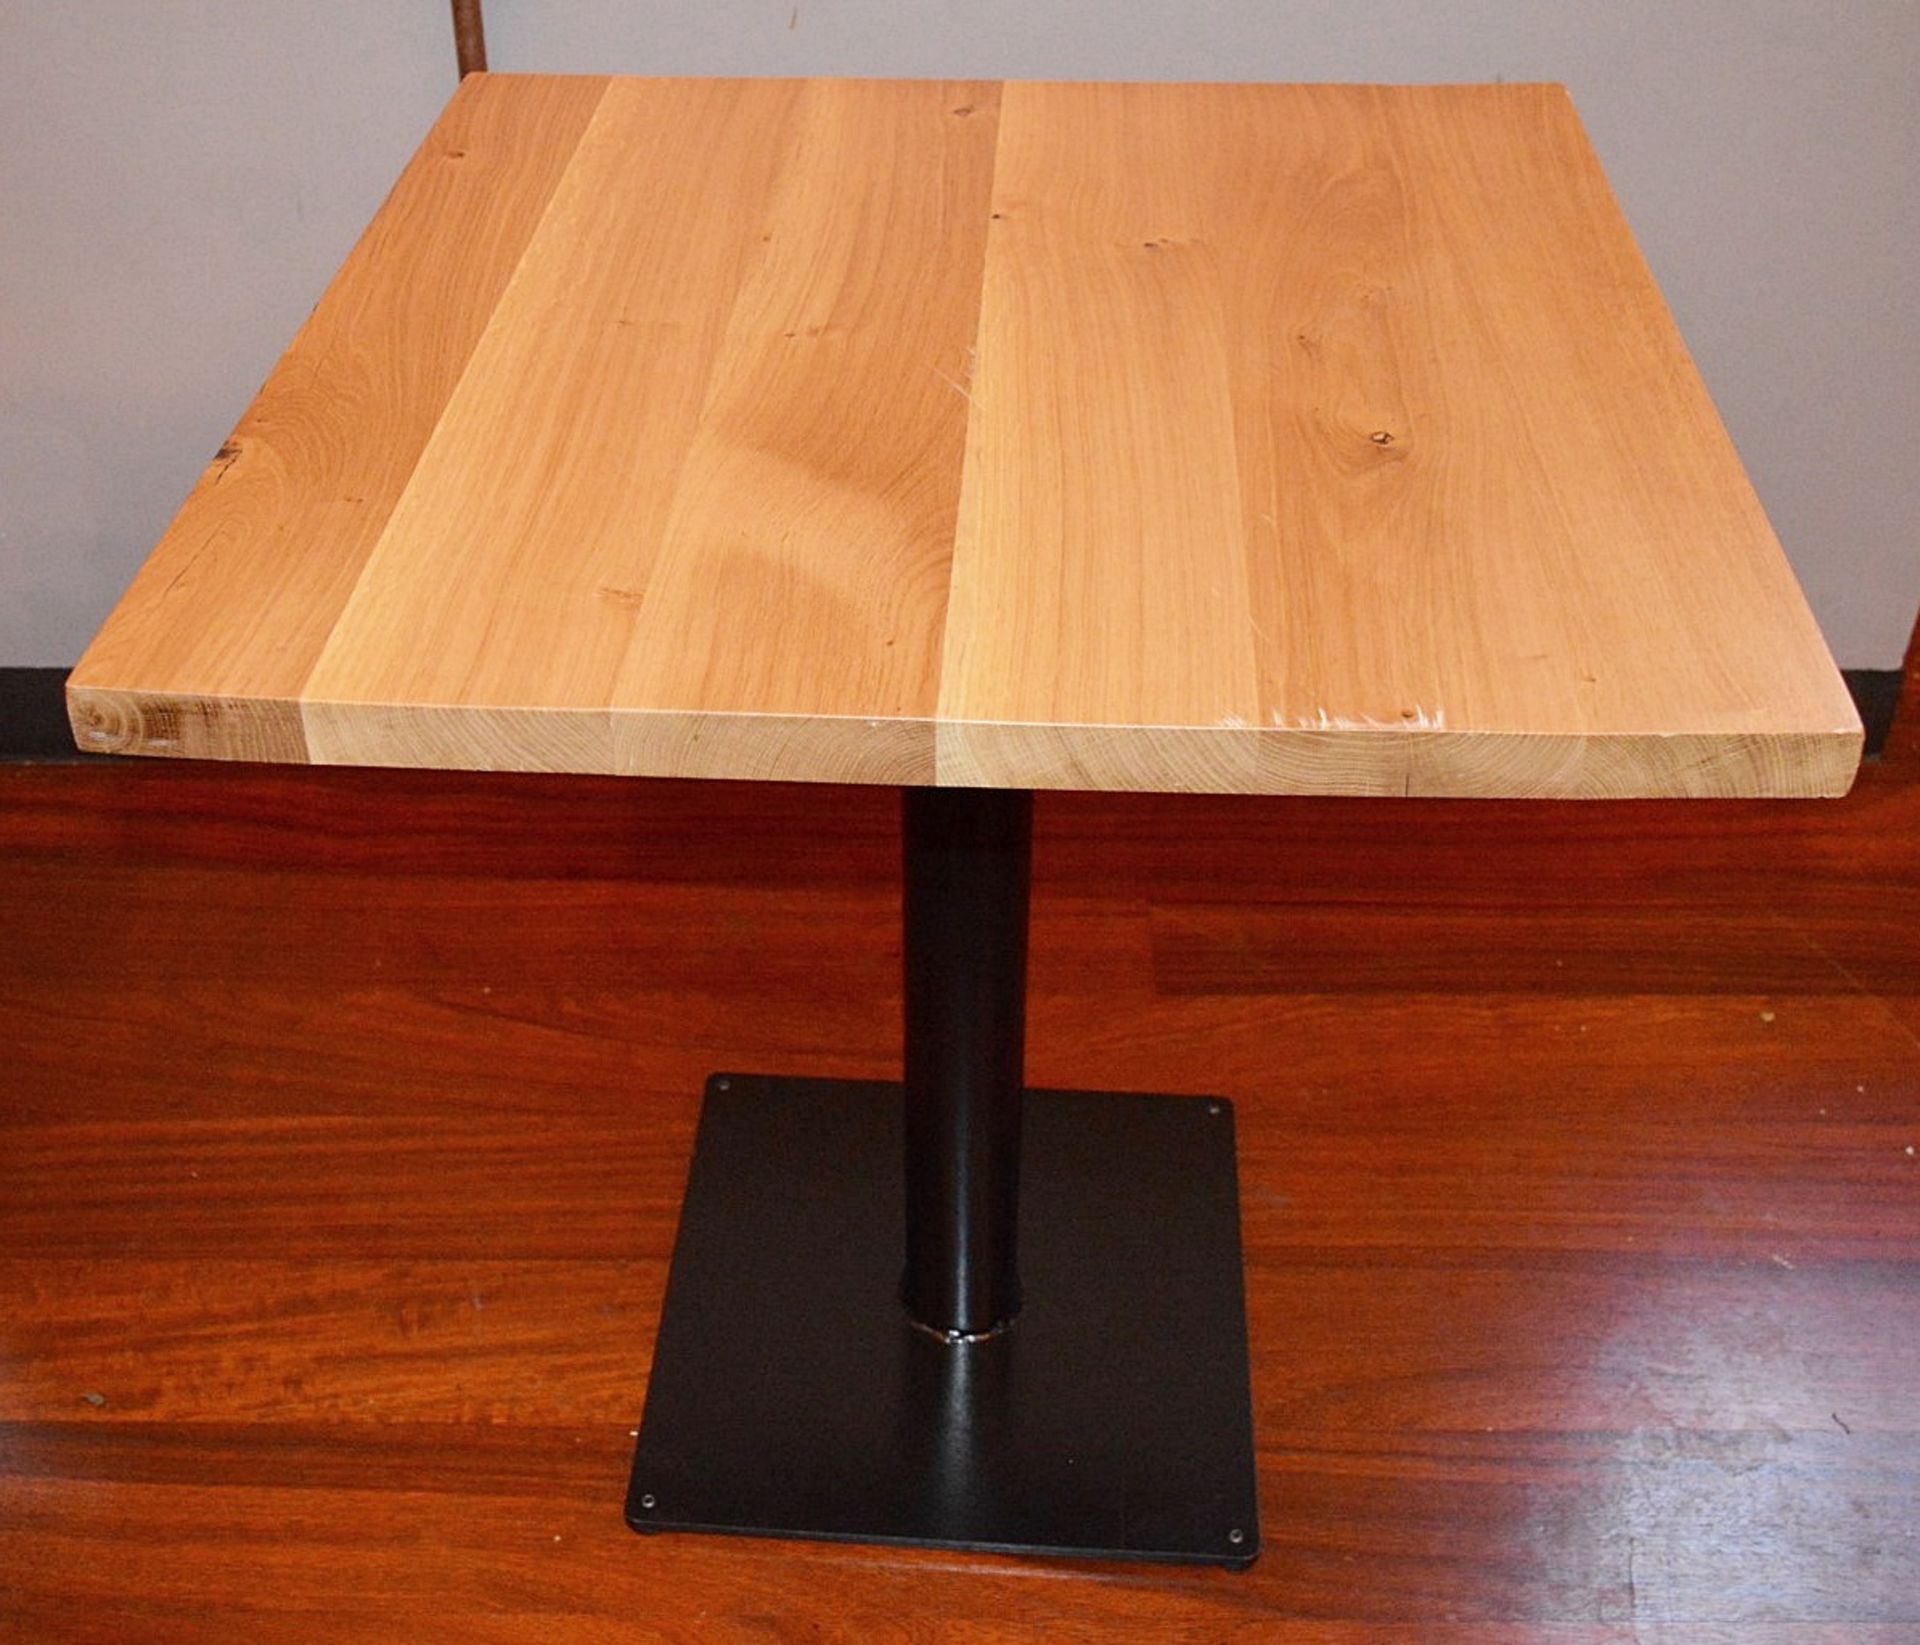 1 x Square Restaurant / Bistro Table - Wooden Topped With A Metal Base - 70x70cm - Recently - Image 2 of 3